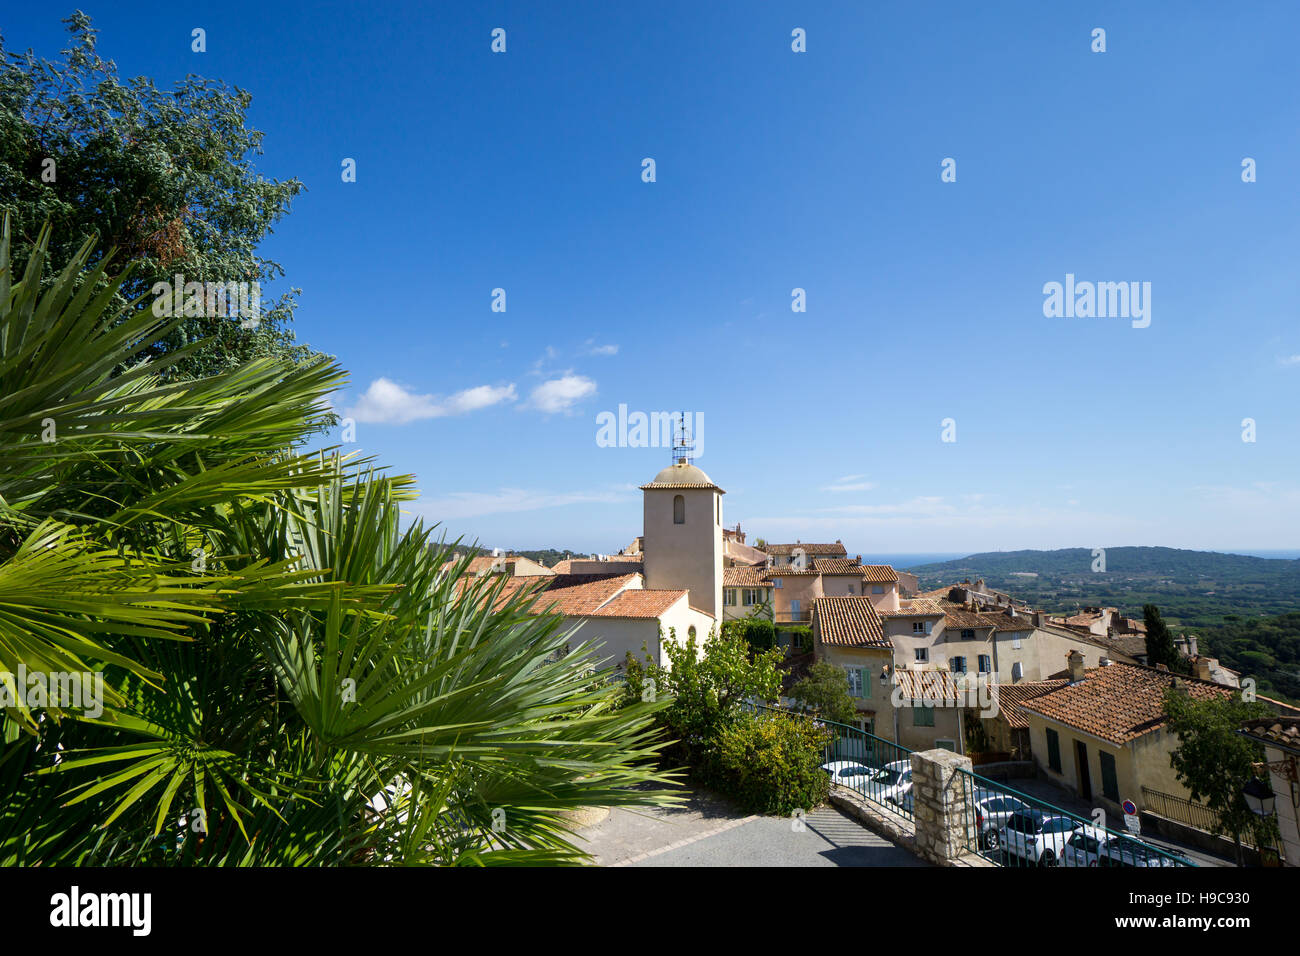 The French hilltop village of Ramatuelle, on the French Riviera in the Var, South of France Stock Photo